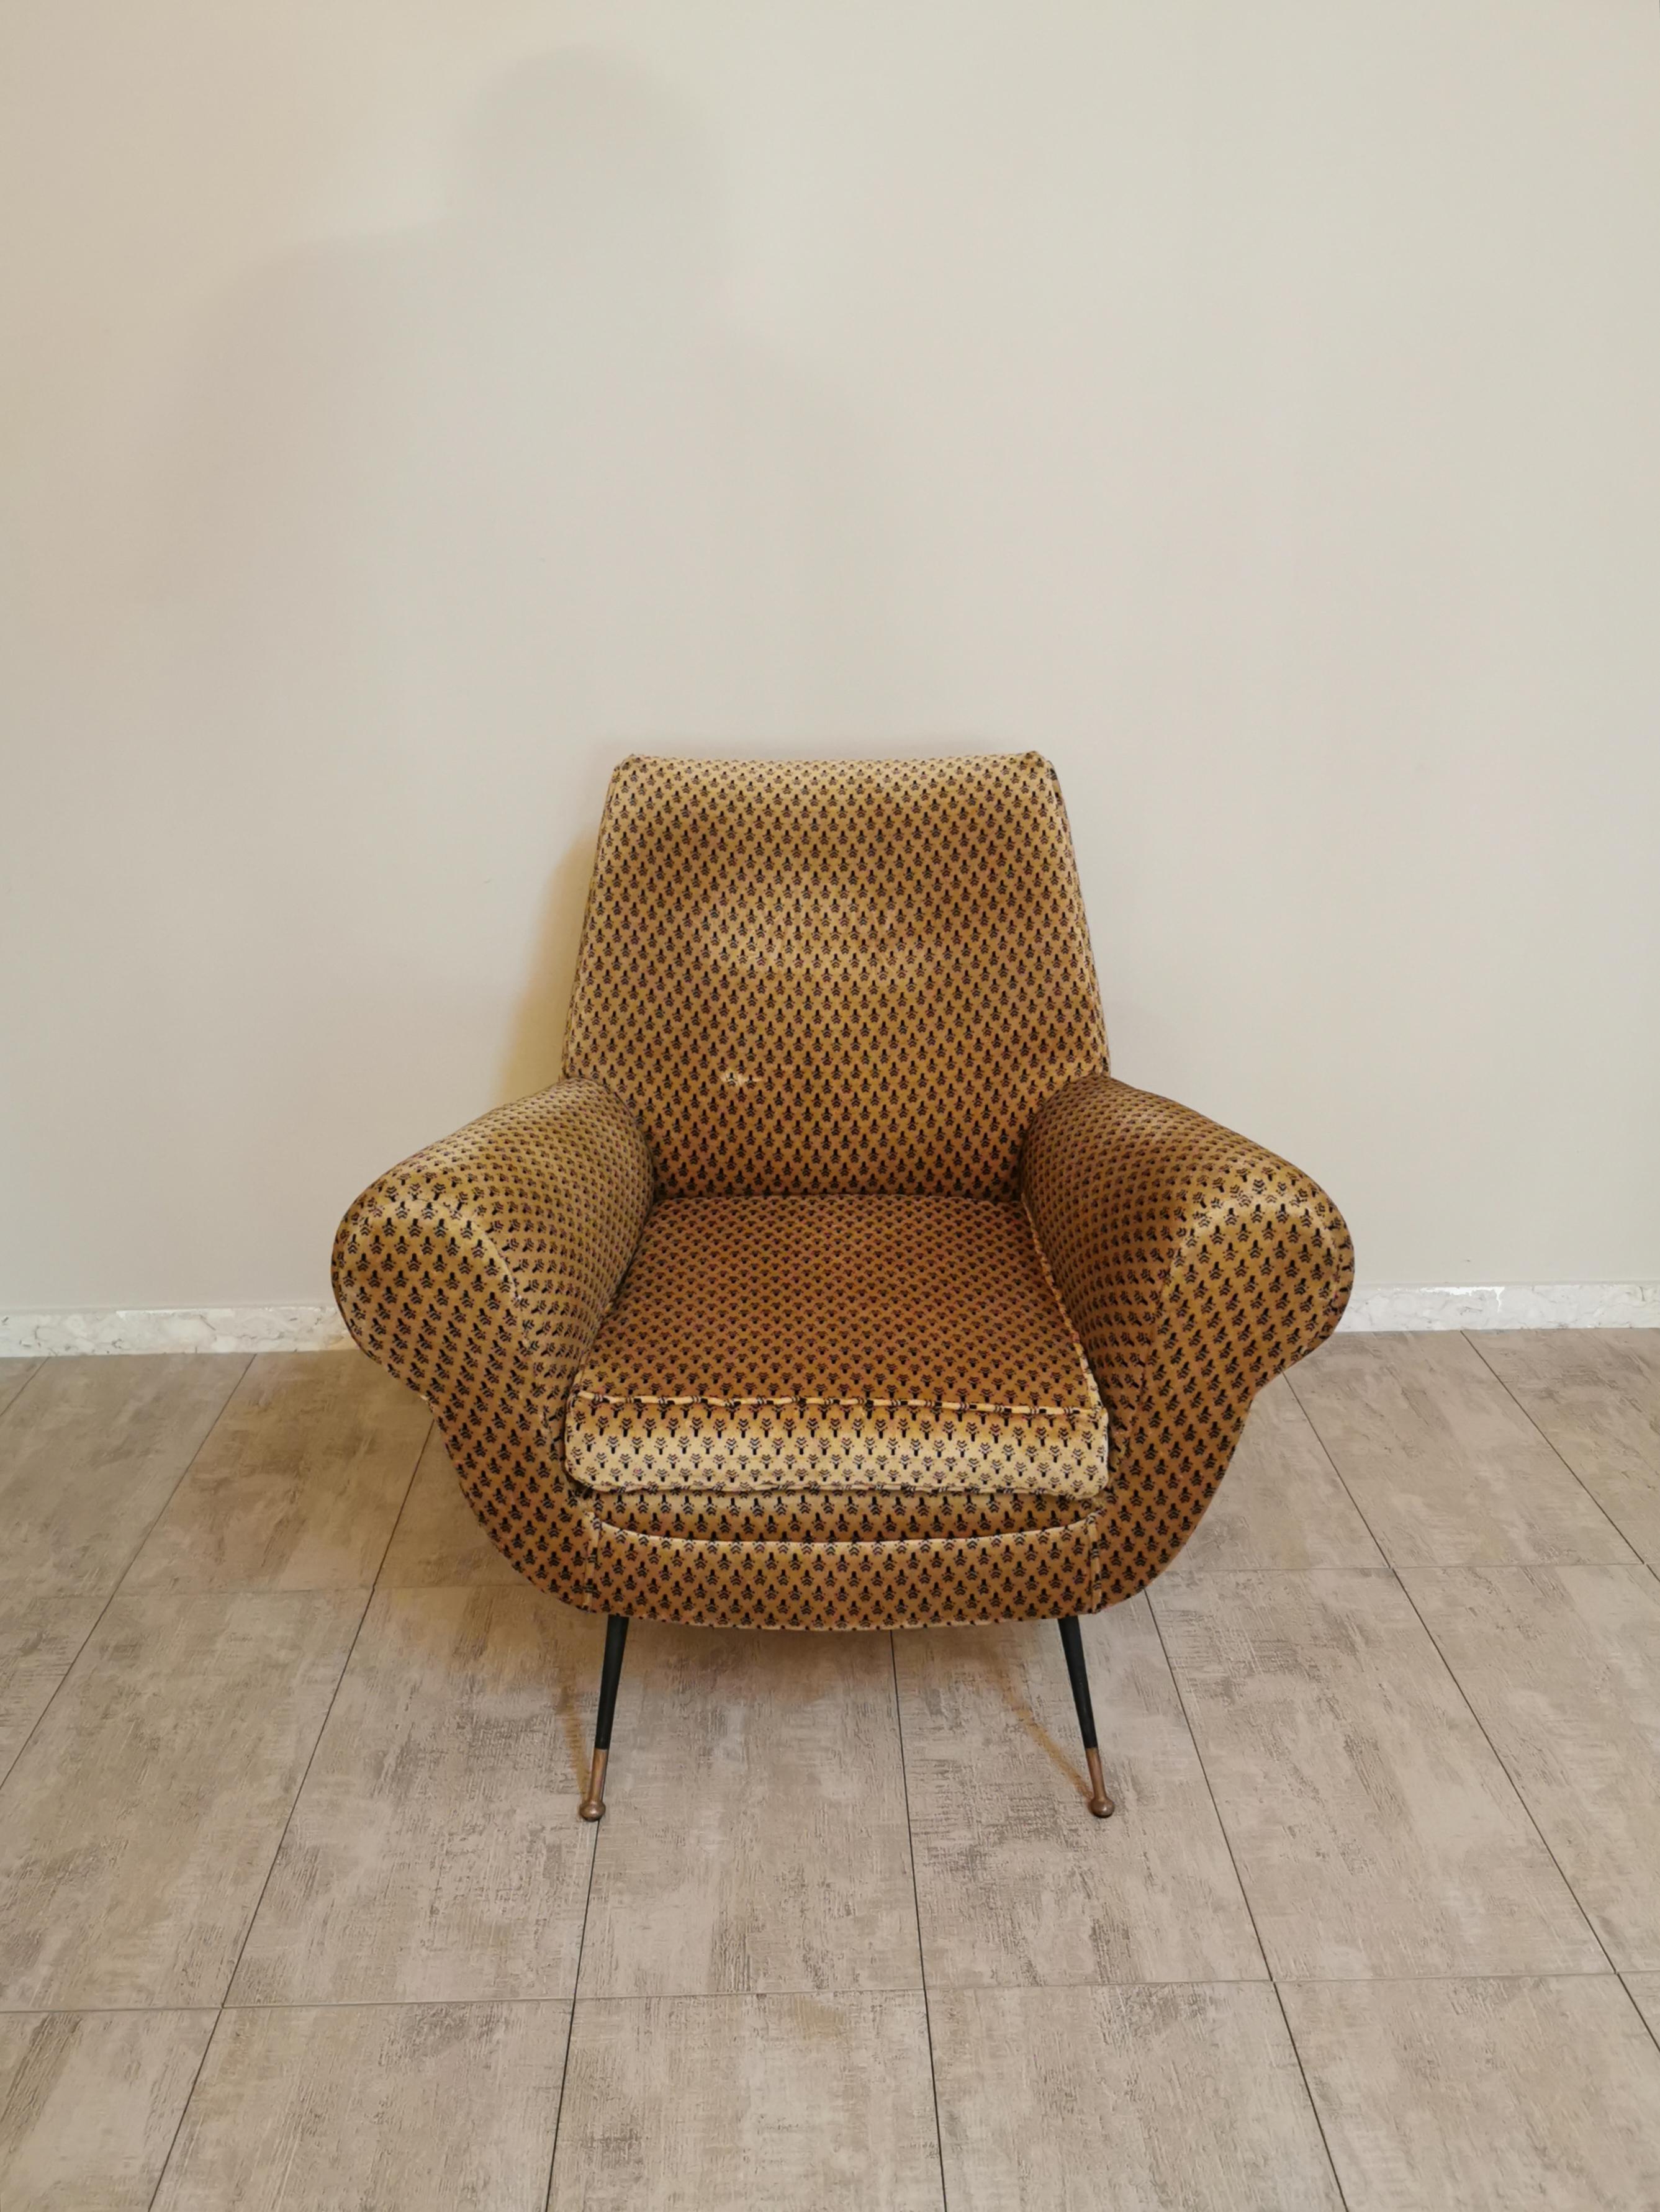 Wonderful and elegant armchair designed by the designer Gigi Radice produced by the Italian company Minotti in the 1950s. The armchair is upholstered in smooth brown and black velvet with particular pin feet entirely in brass.